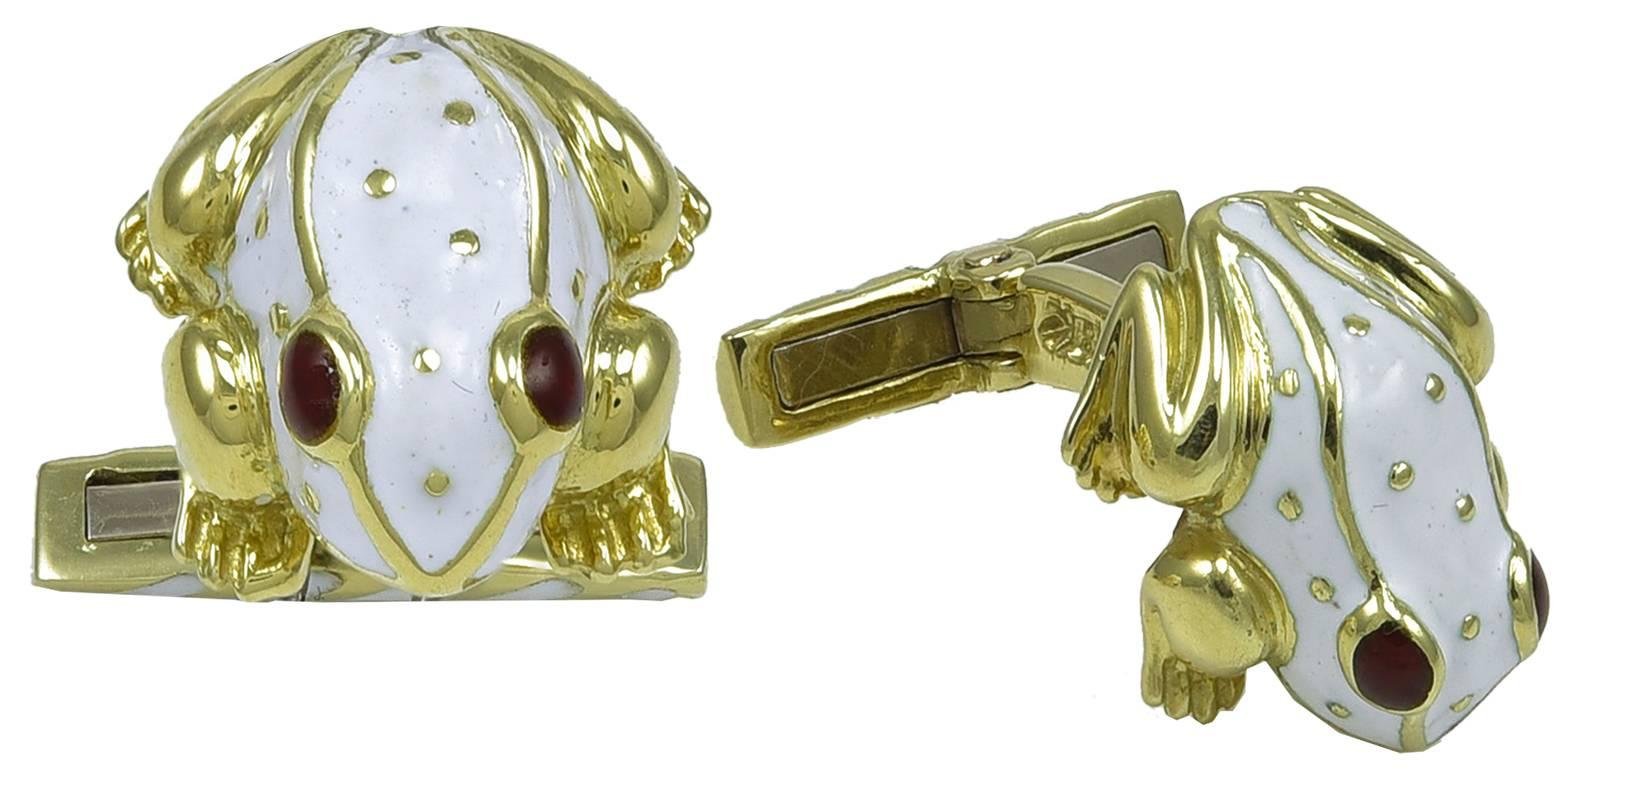 Classic figural frog cufflinks. Made and signed by DAVID WEBB. 18K yellow gold with white and red enamel. Gold and white enamel striped back bar. Distinctive and desirable.

Alice Kwartler has sold the finest antique gold & diamond jewelry and